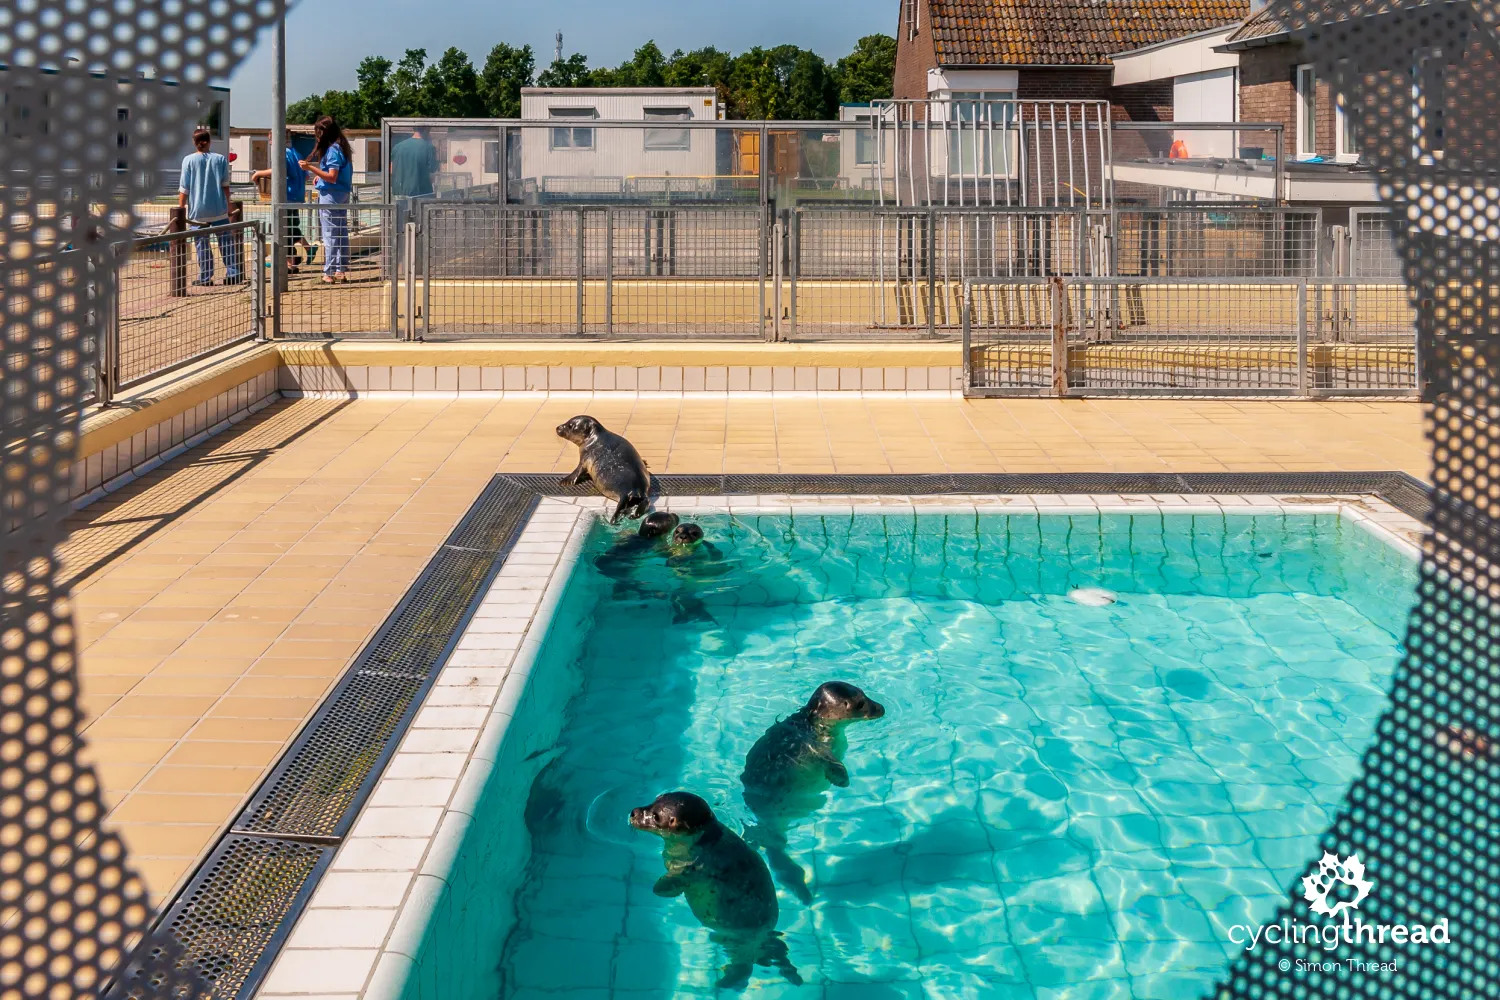 The Seal Rehabilitation and Research Centre in Pieterburen